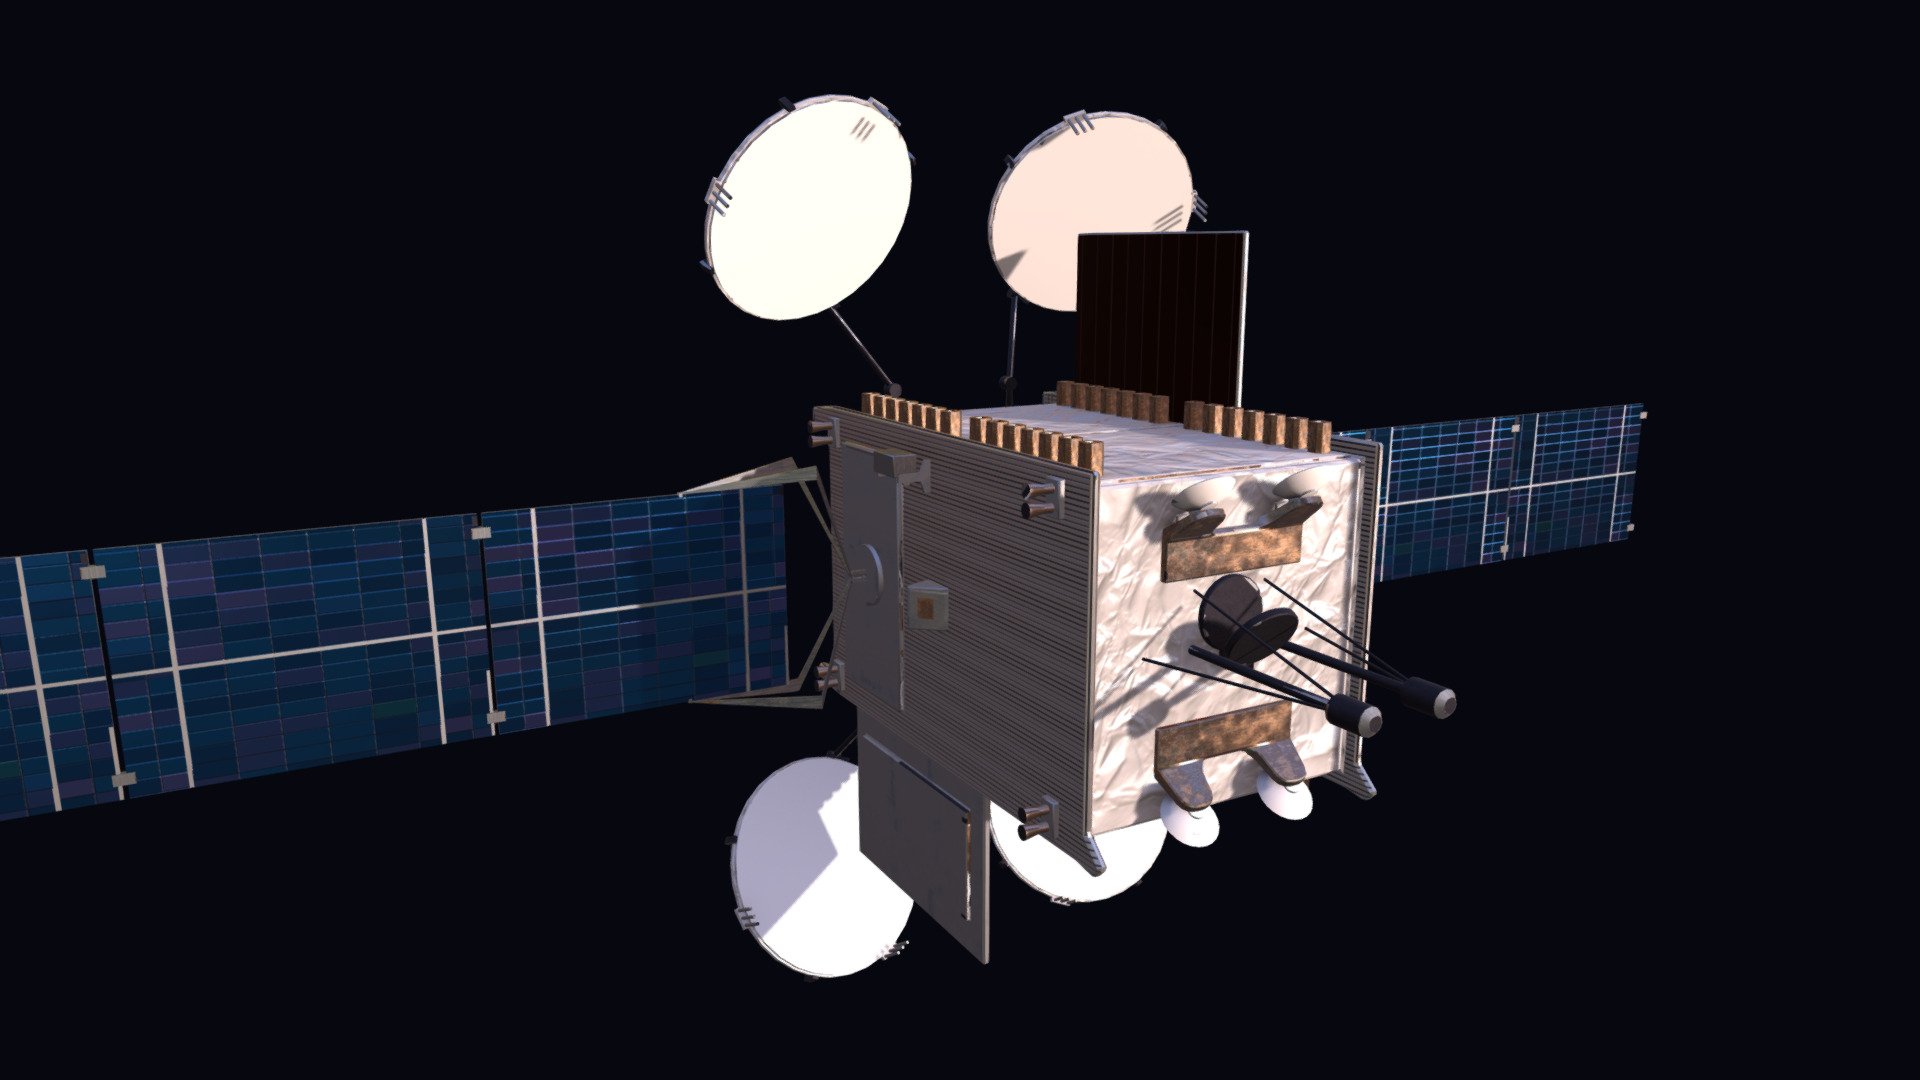 ViaSat-2 is a commercial communications satellite launched June 1, 2017 and went live late February 2018. It was advertised to be the world's highest capacity communications satellite with a throughput of 300 Gbit/s, succeeding HughesNet EchoStar XIX launched in December 2016. It is the second Ka-band satellite launched by ViaSat after ViaSat-1. The satellite provides internet service through ViaSat (Exede prior to rebranding) to North America, parts of South America, including Mexico and the Caribbean, and to air and maritime routes across the Atlantic Ocean to Europe 3d model